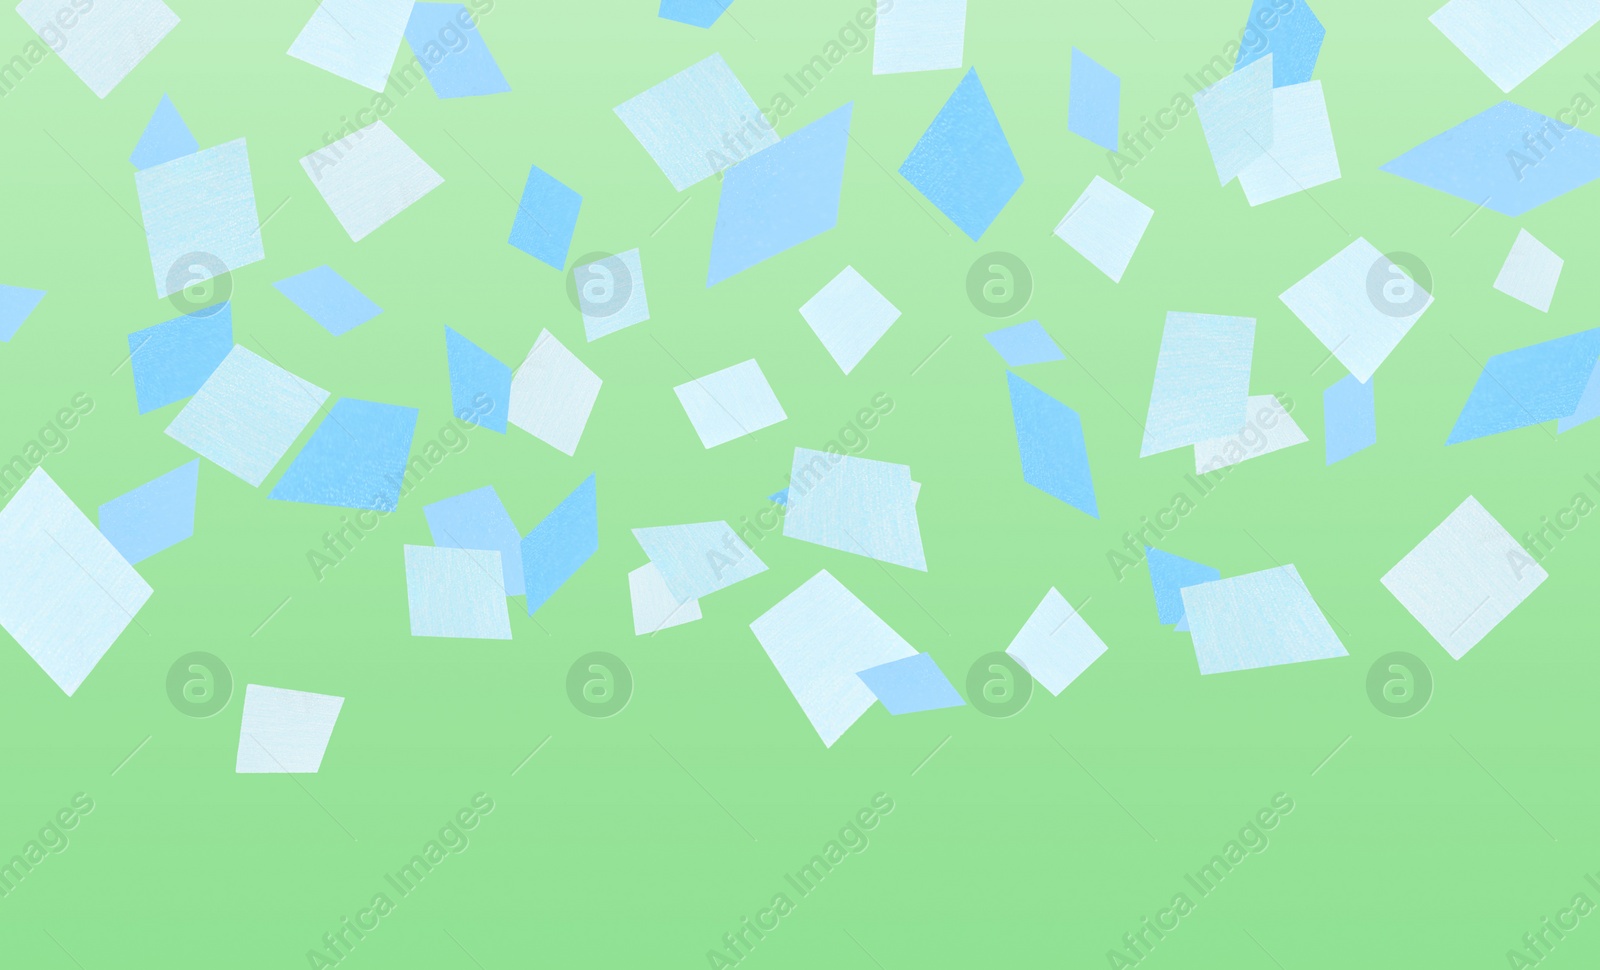 Image of Bright confetti falling on light green background. Banner design